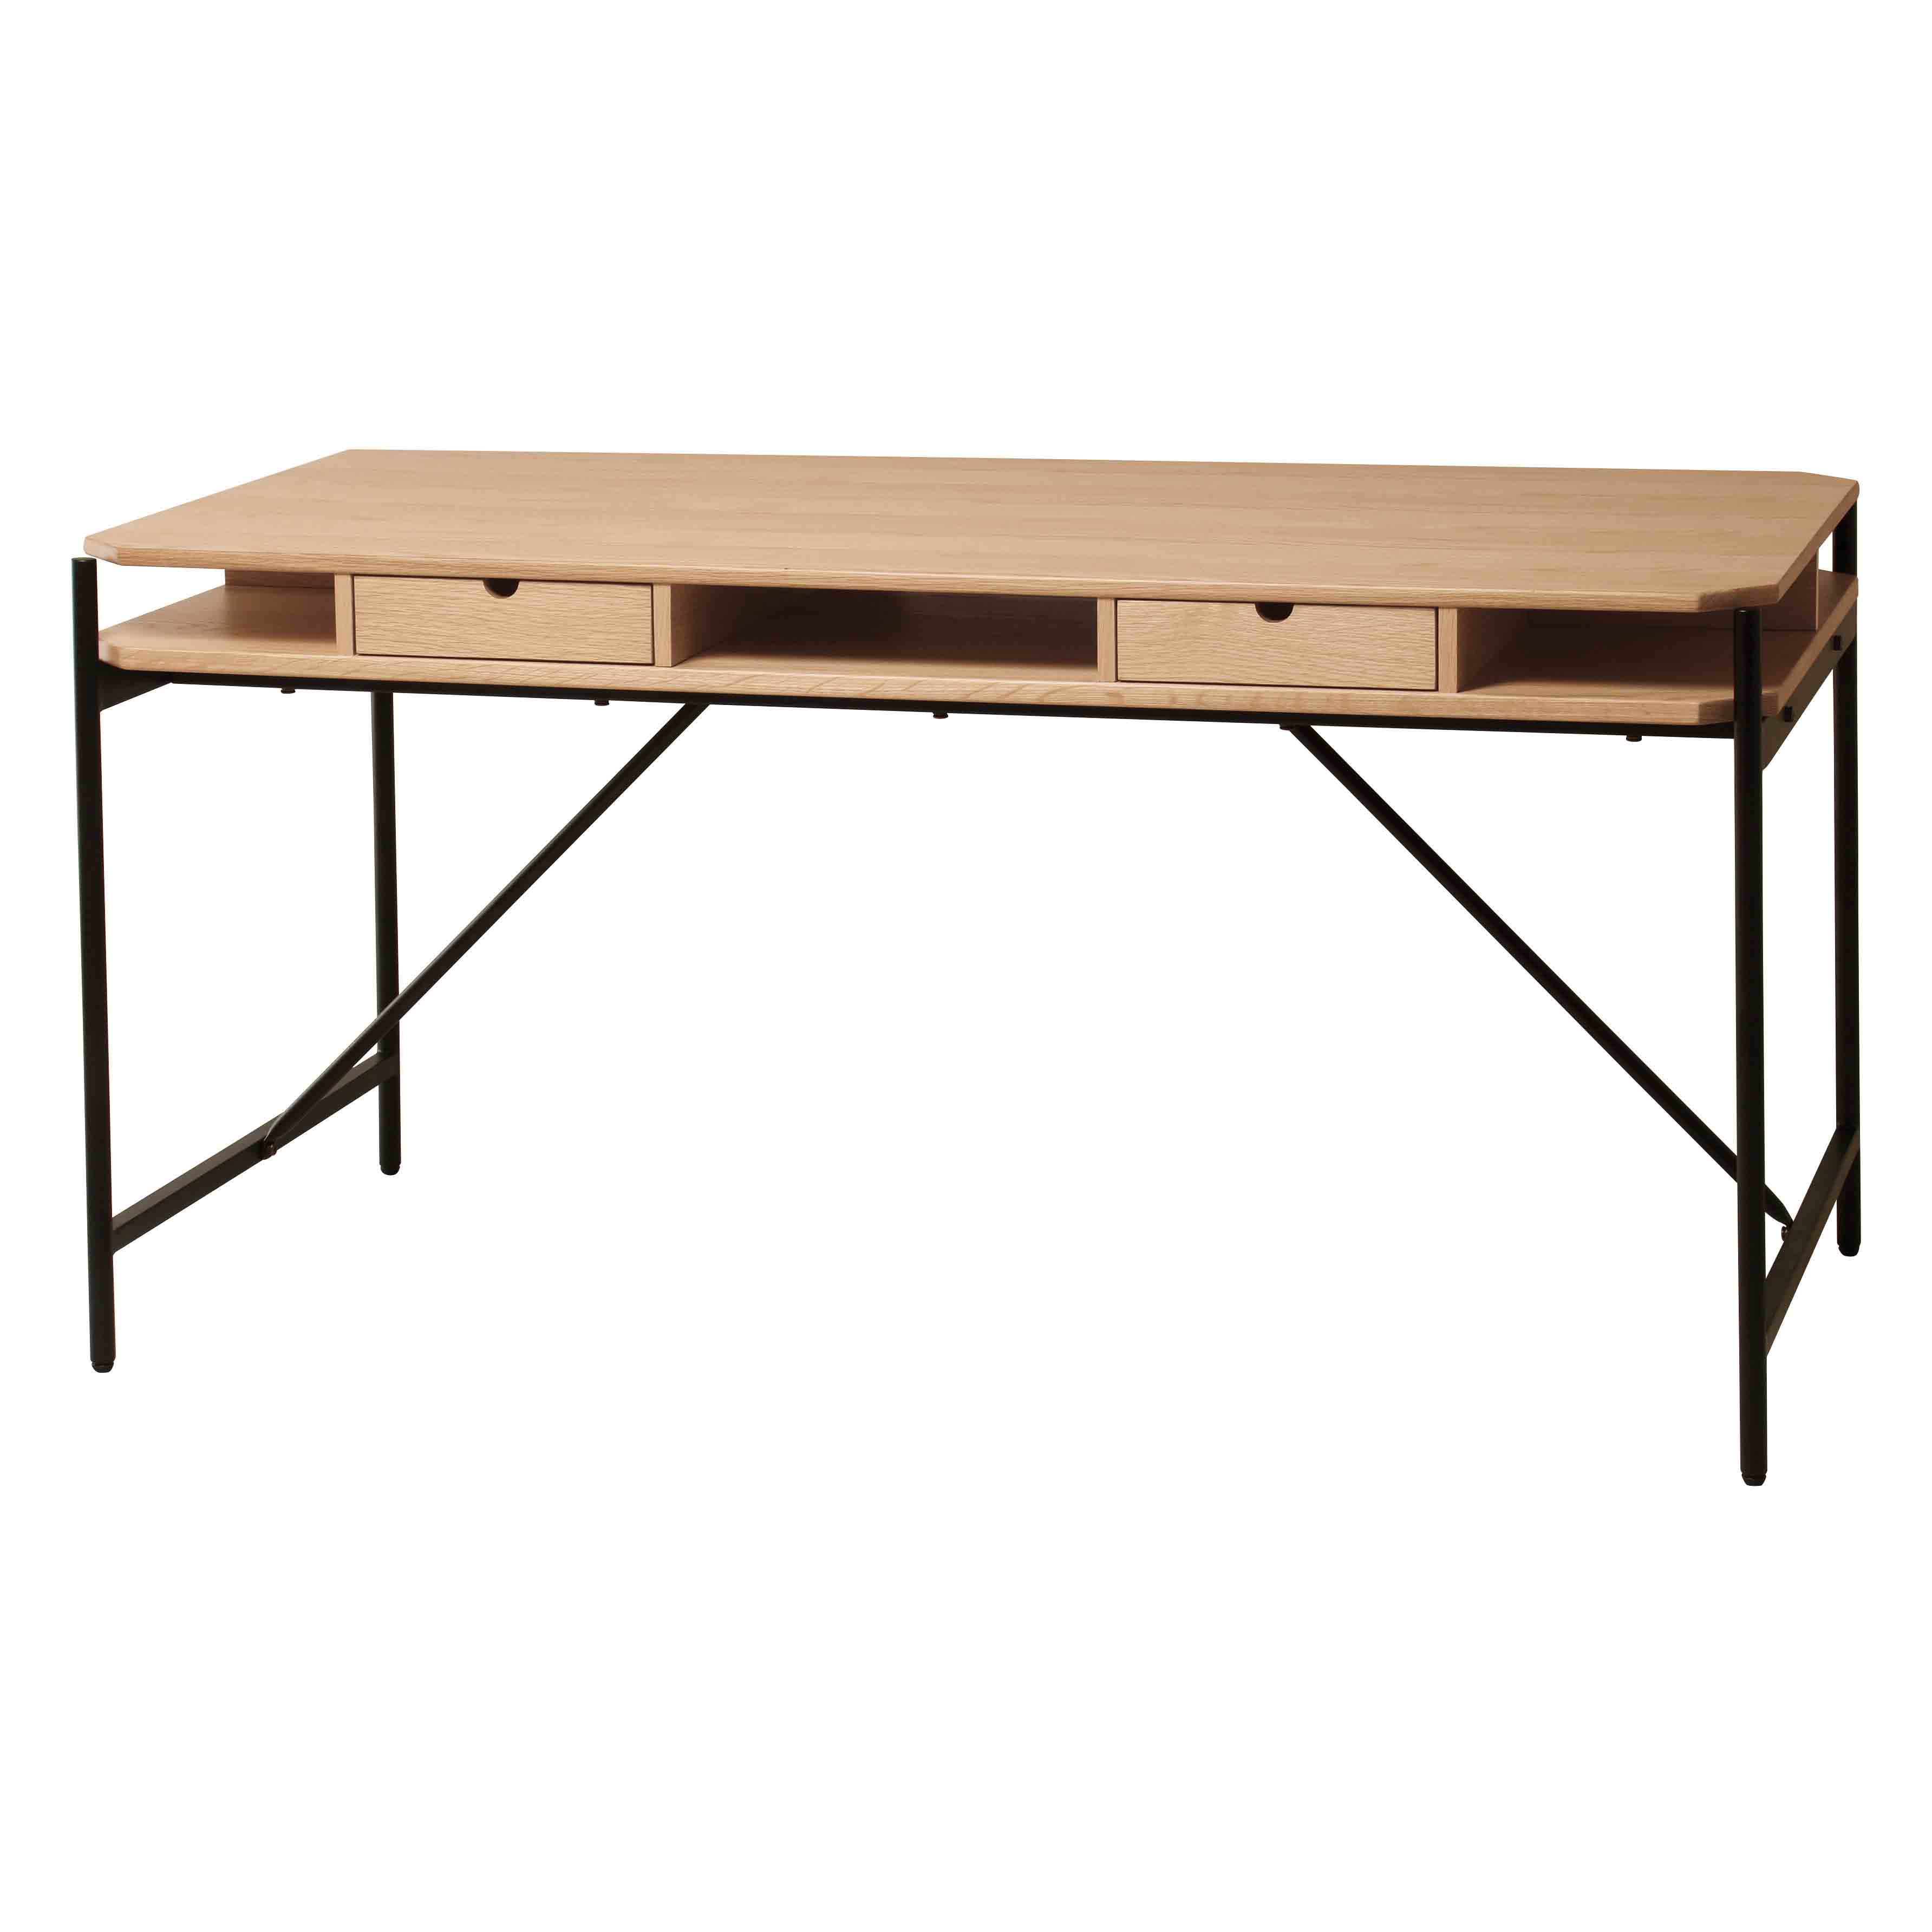 Glam working dining table